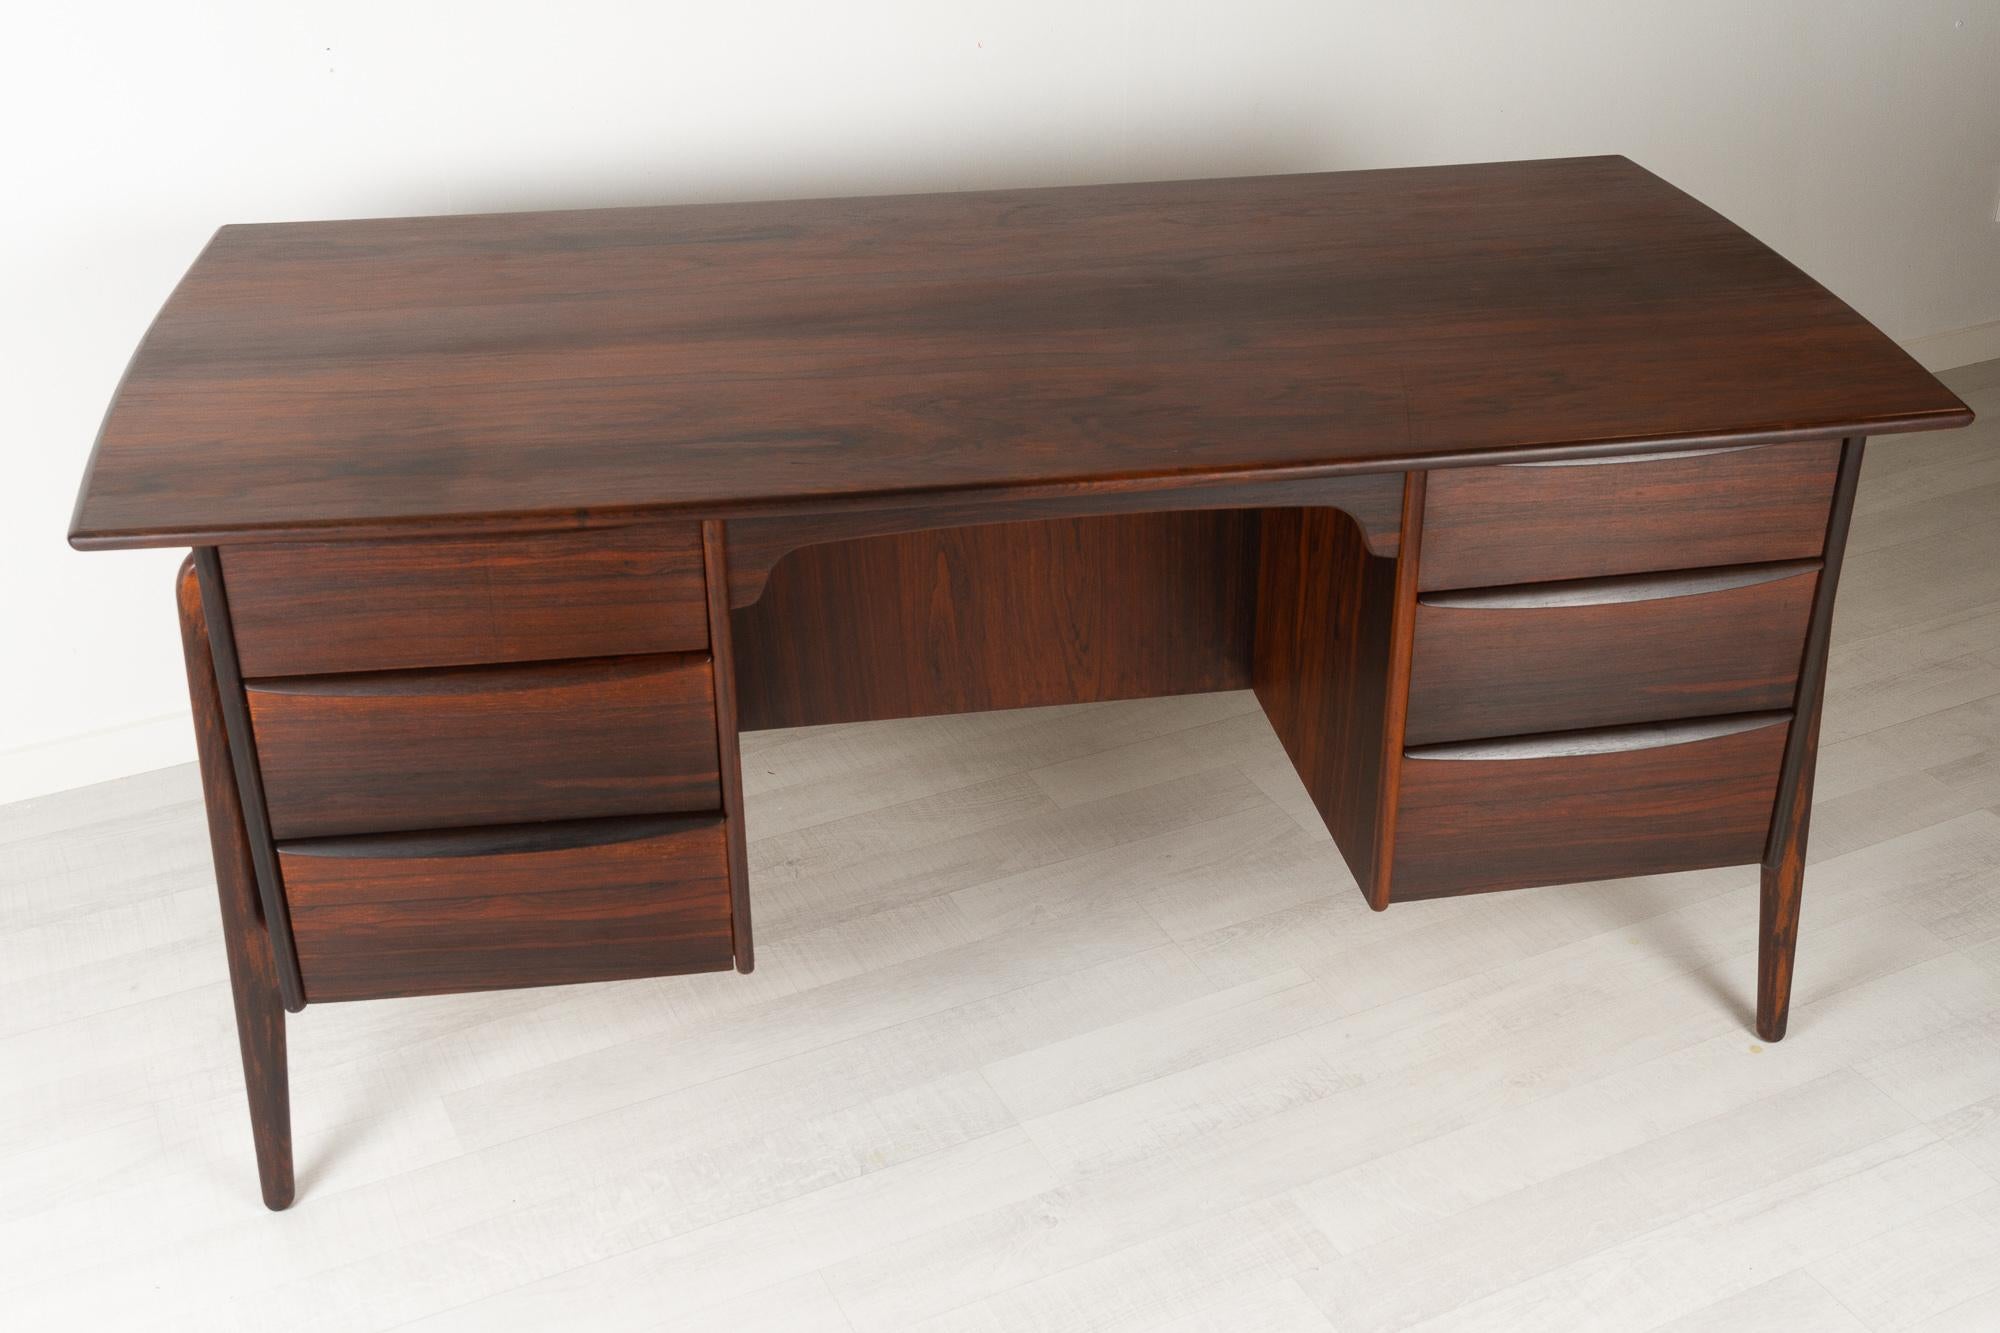 Mid-20th Century Danish Modern Rosewood Desk by Svend Aage Madsen 1960s